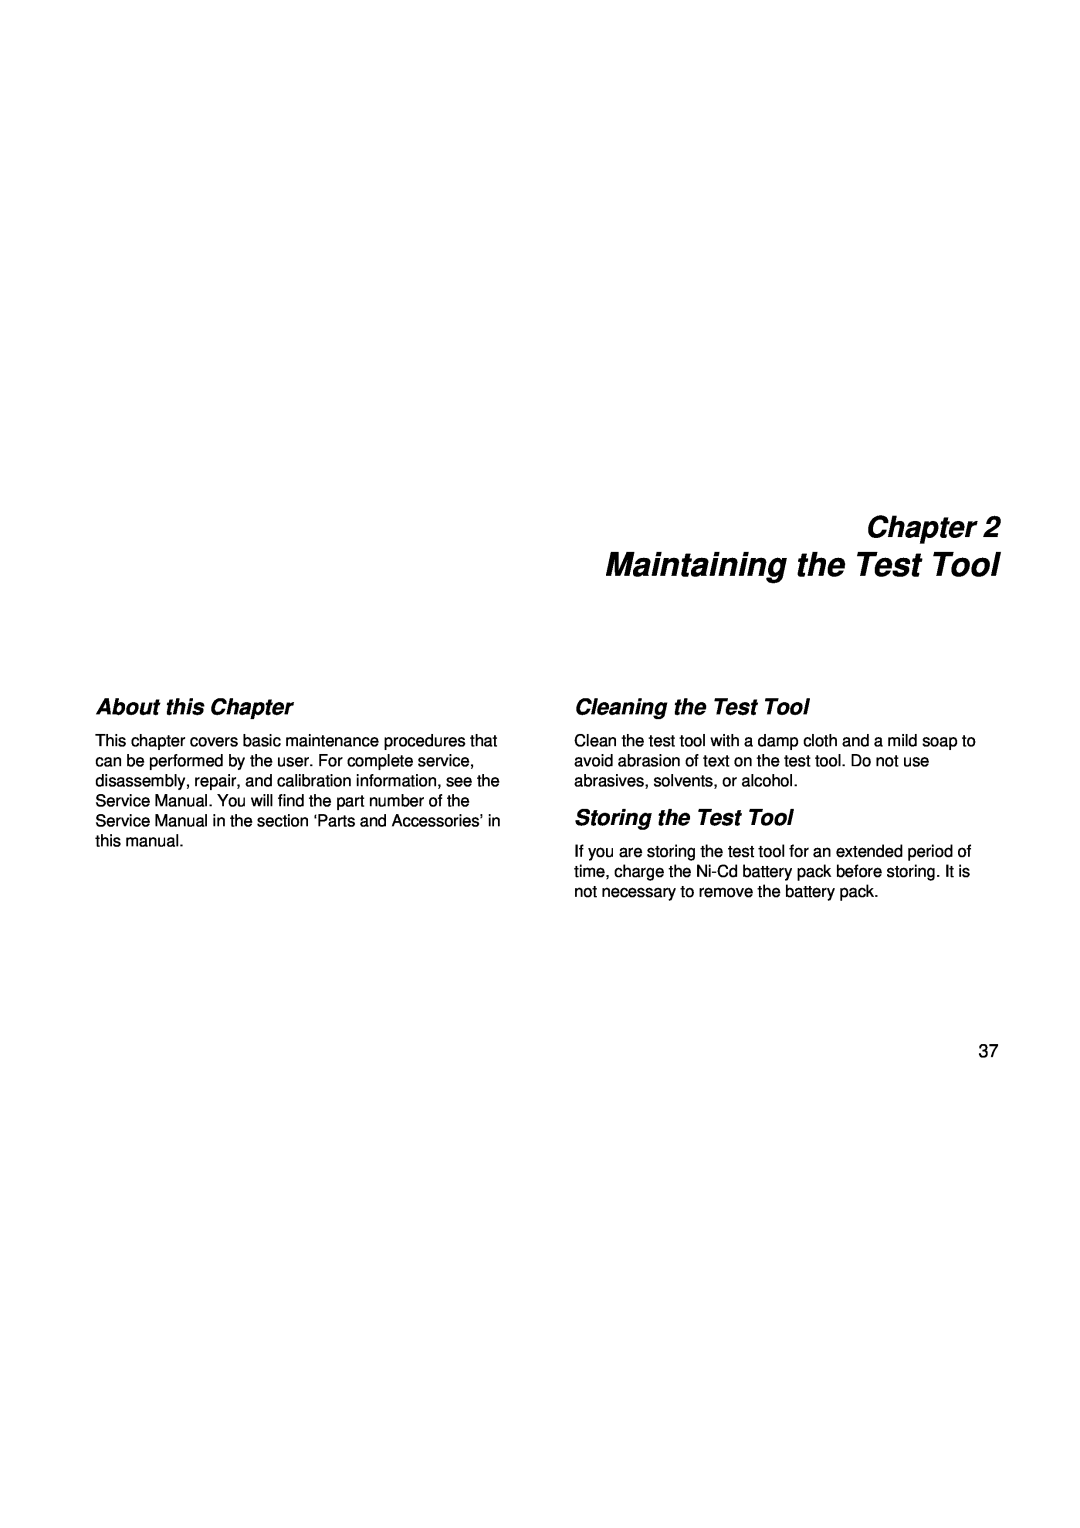 Fluke fluke123 user manual Maintaining the Test Tool, About this Chapter, Cleaning the Test Tool, Storing the Test Tool 